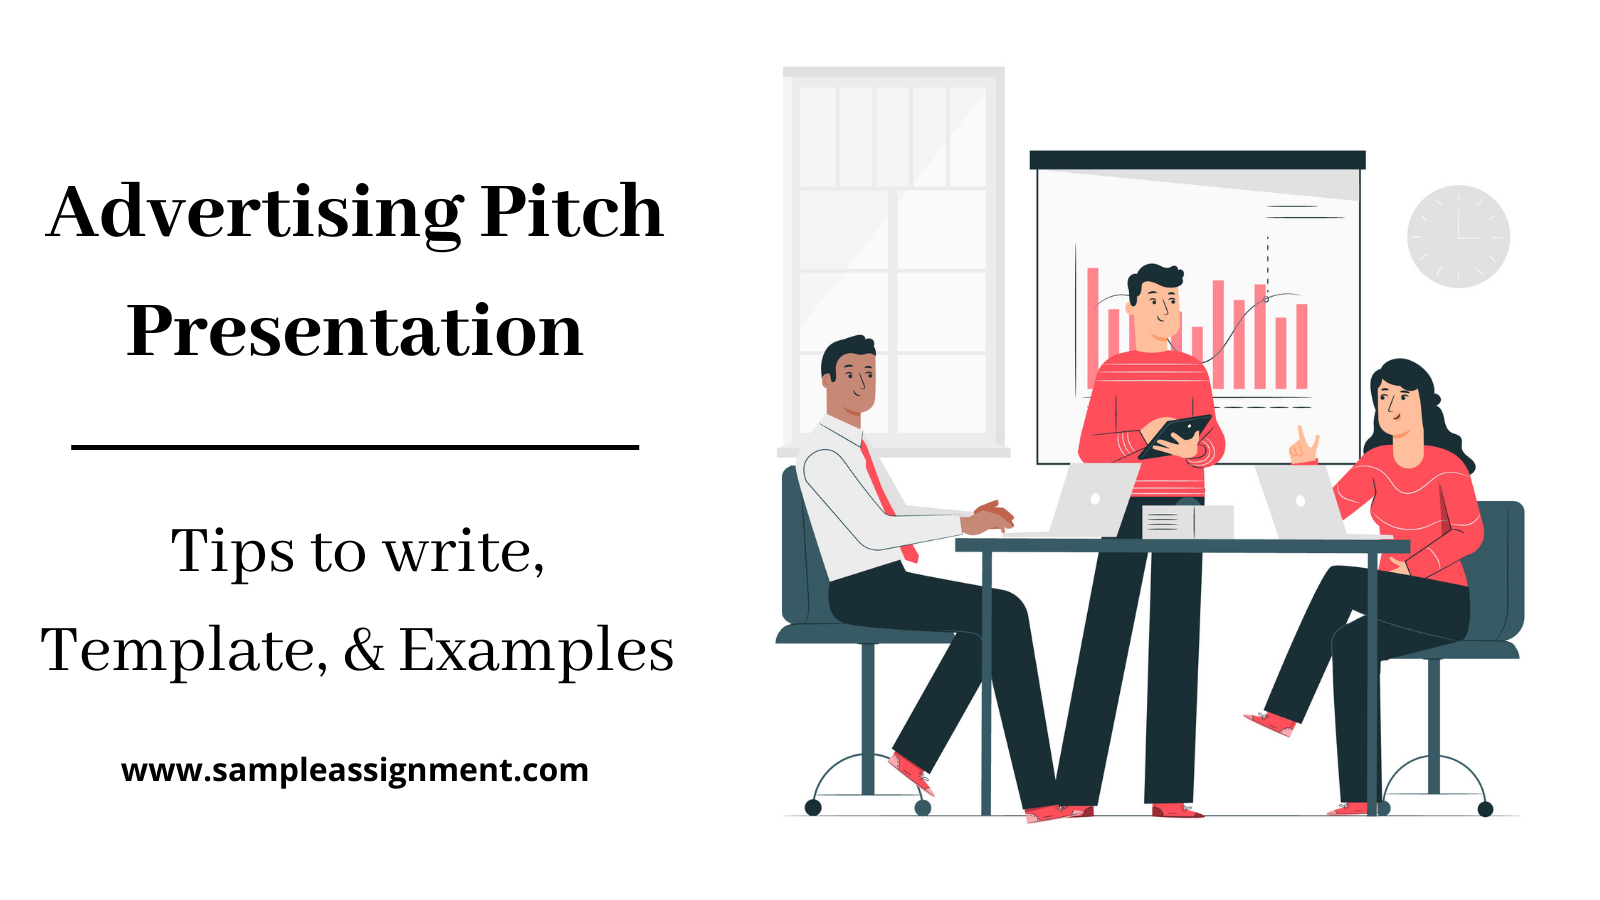 What is Advertising Pitch presentation